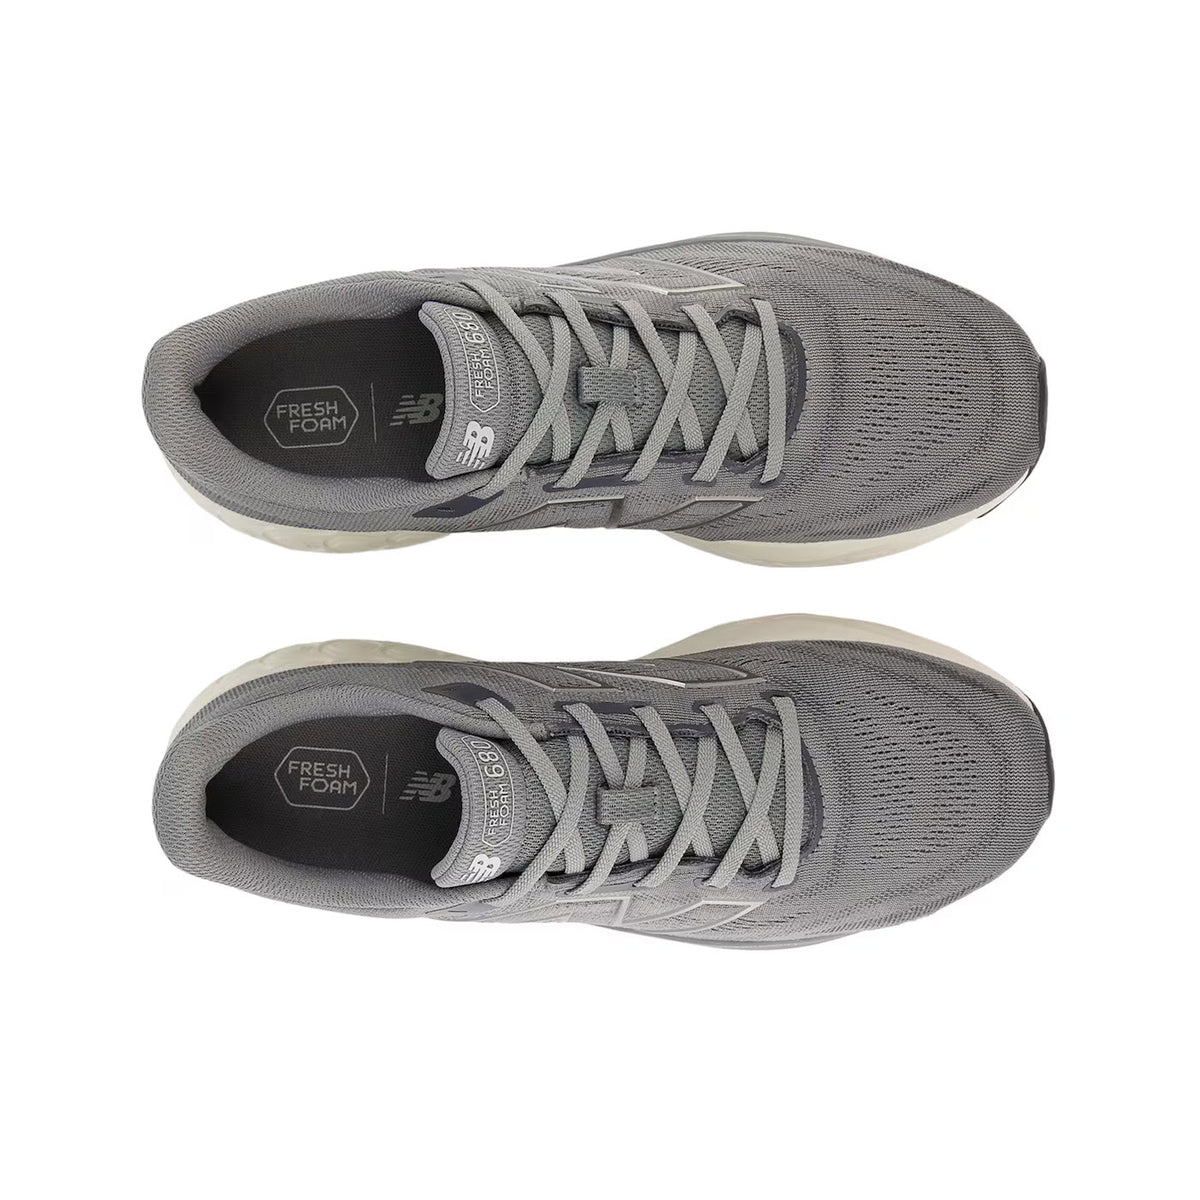 A pair of New Balance 680v8 Blue Harbor Grey/Magnet/Dark Silver running shoes, viewed from above, showcasing the laced-up fronts and the &quot;fresh foam&quot; insoles.